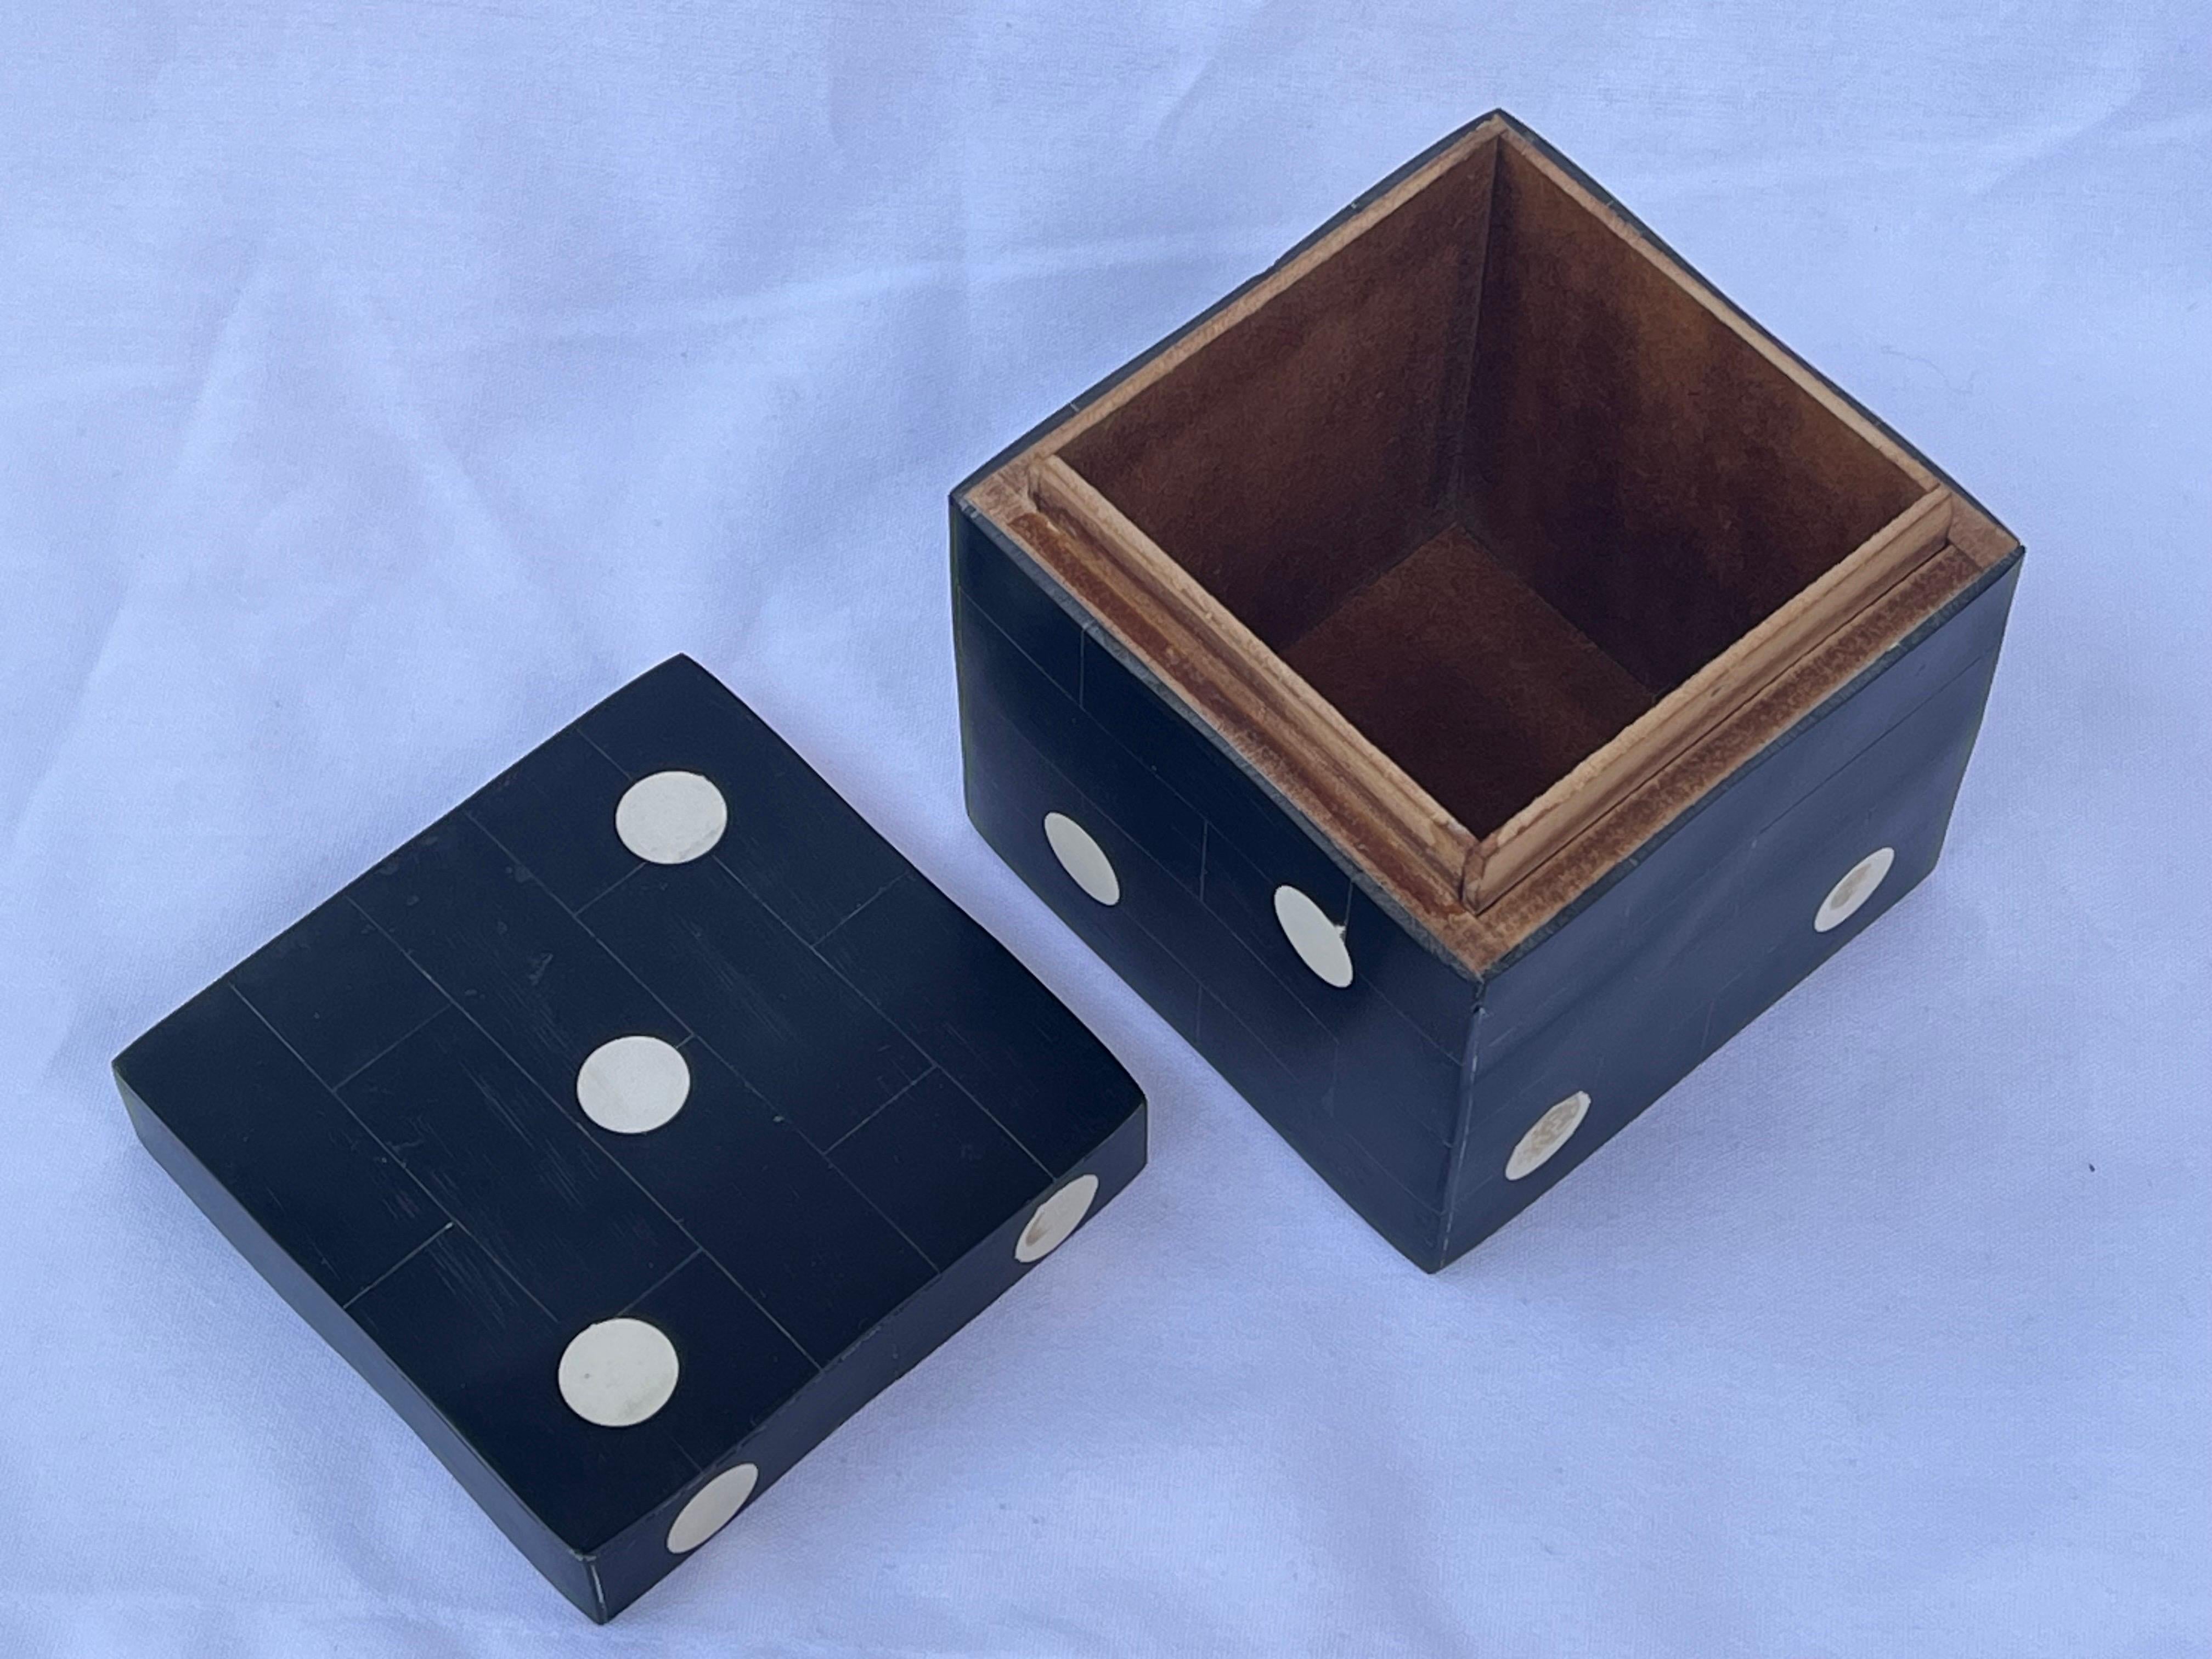 Tessellated Vintage Dice or Die Lidded Cube Box Paperweight Desk Accessory  For Sale 1